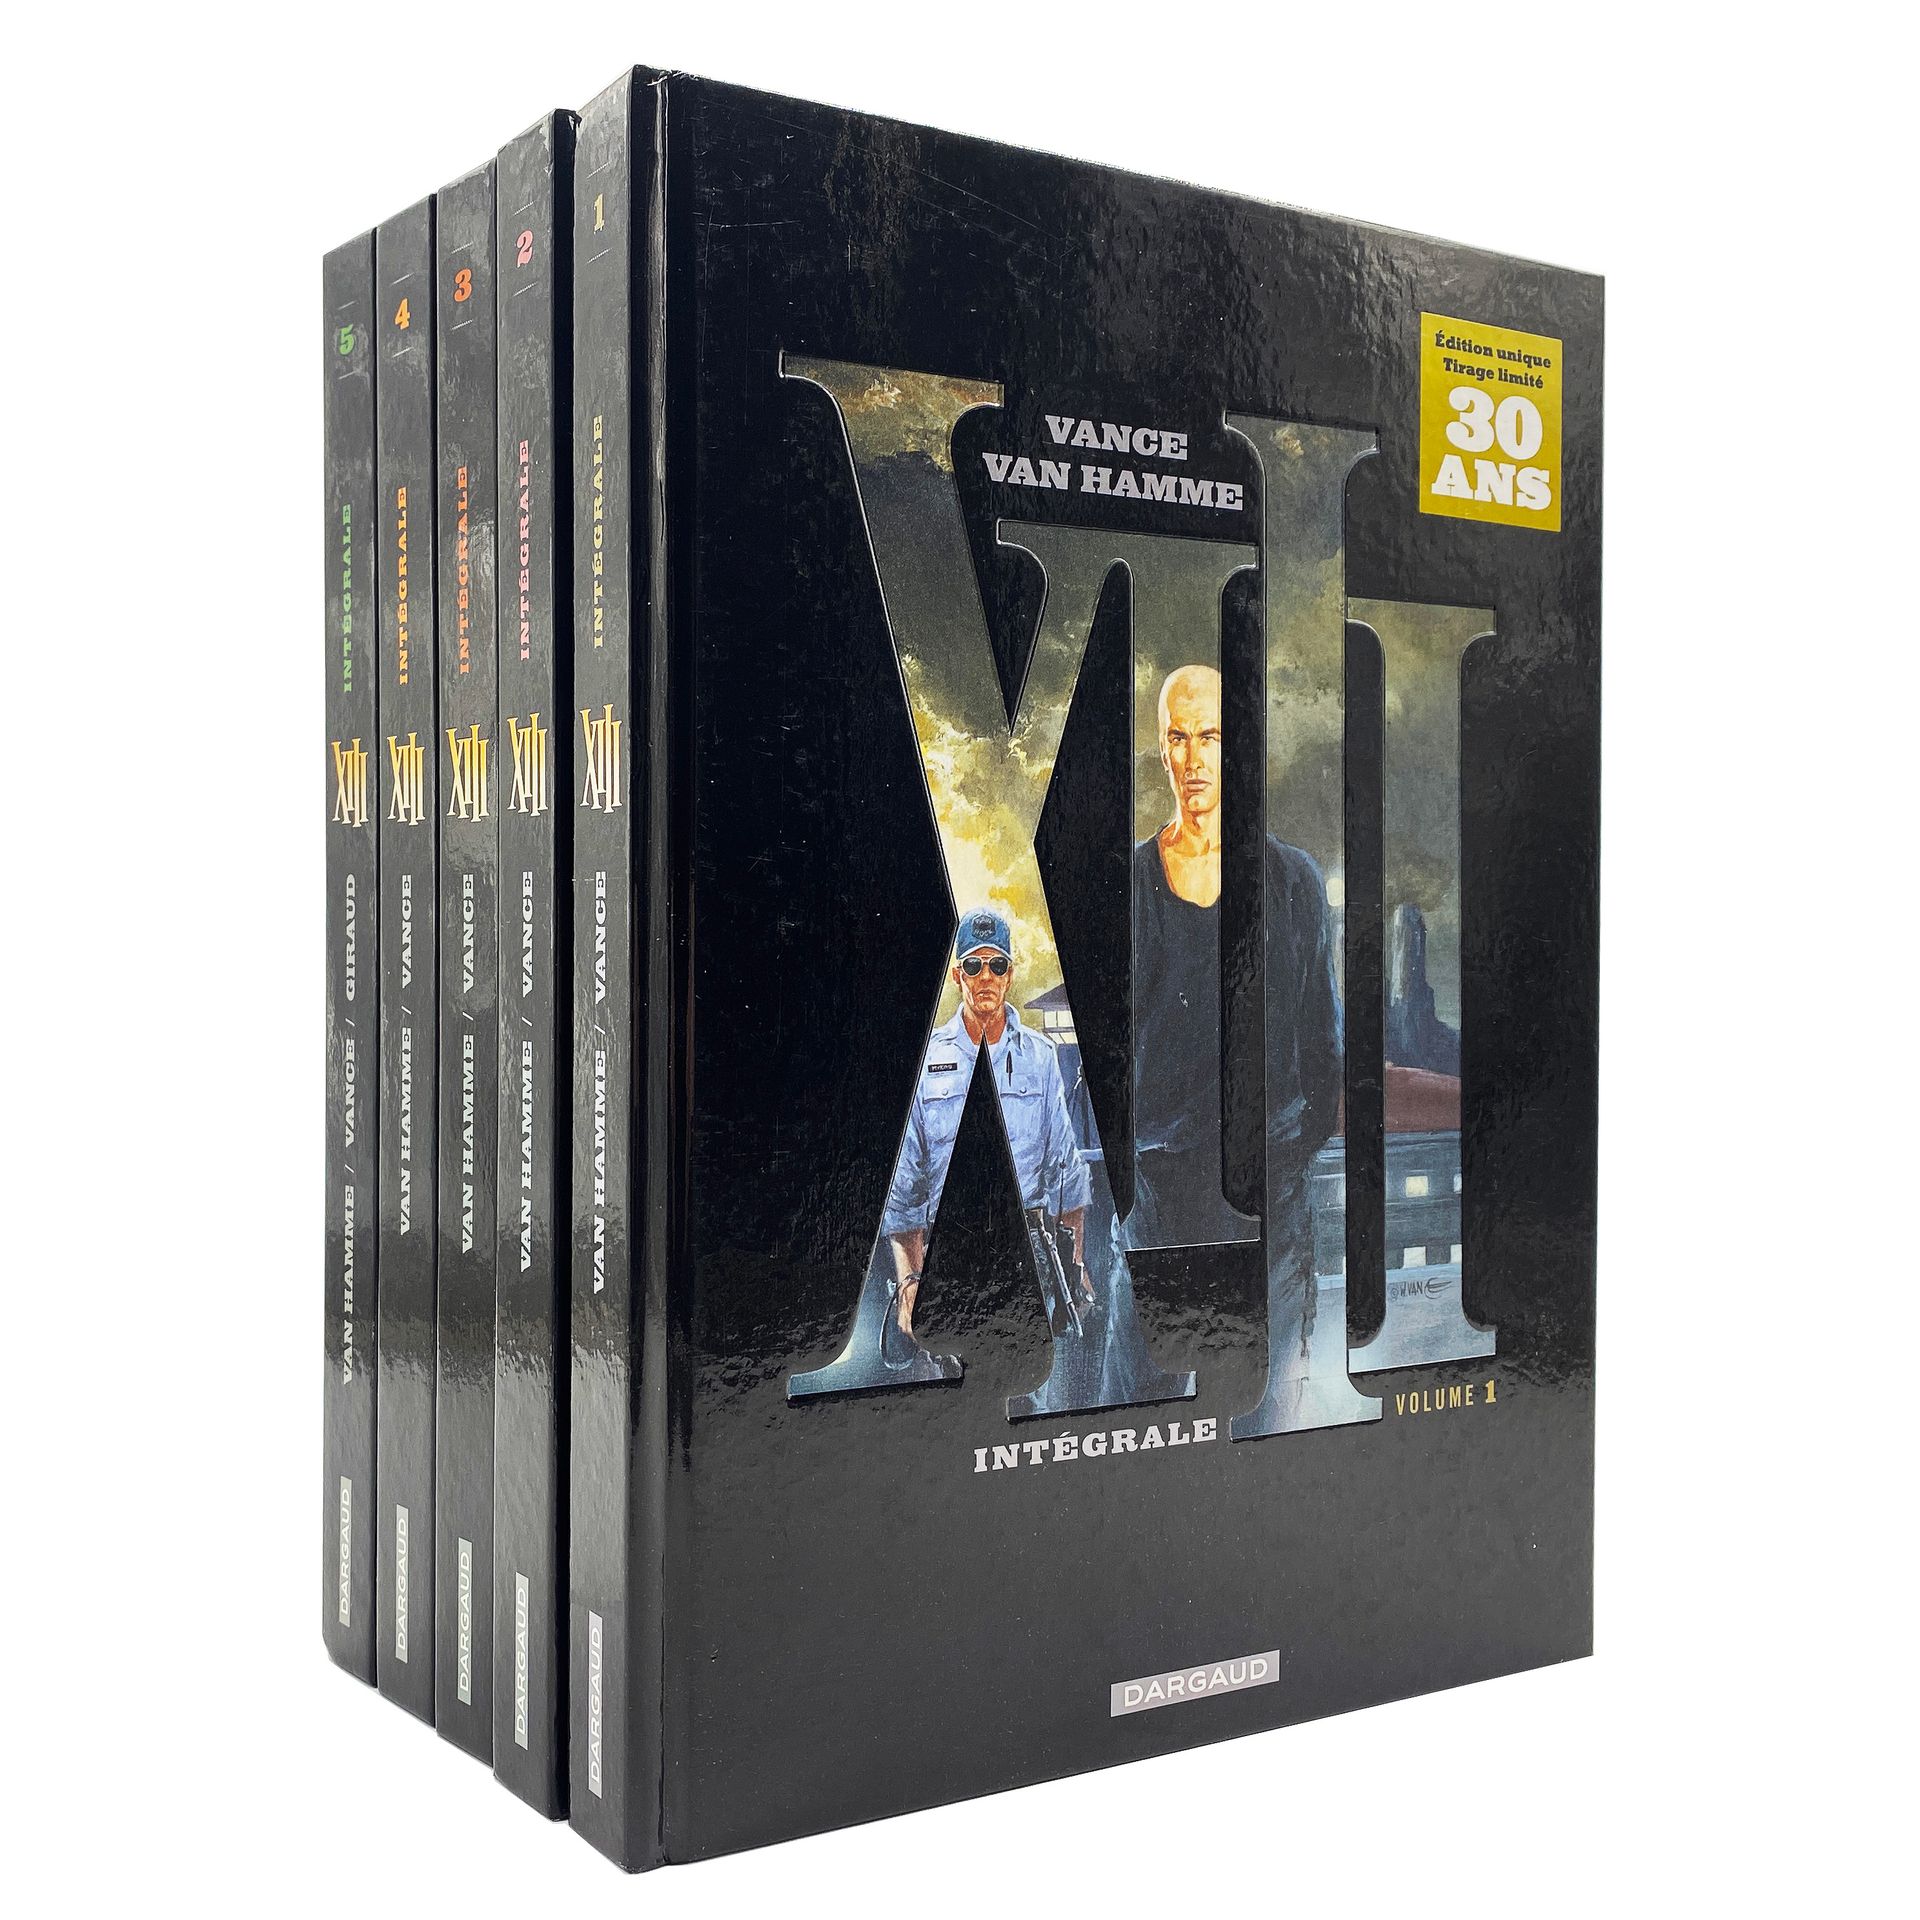 Null VAN HAMME / VANCE - "XIII" - Complete sets 1 to 5 in first edition. 
One-of&hellip;